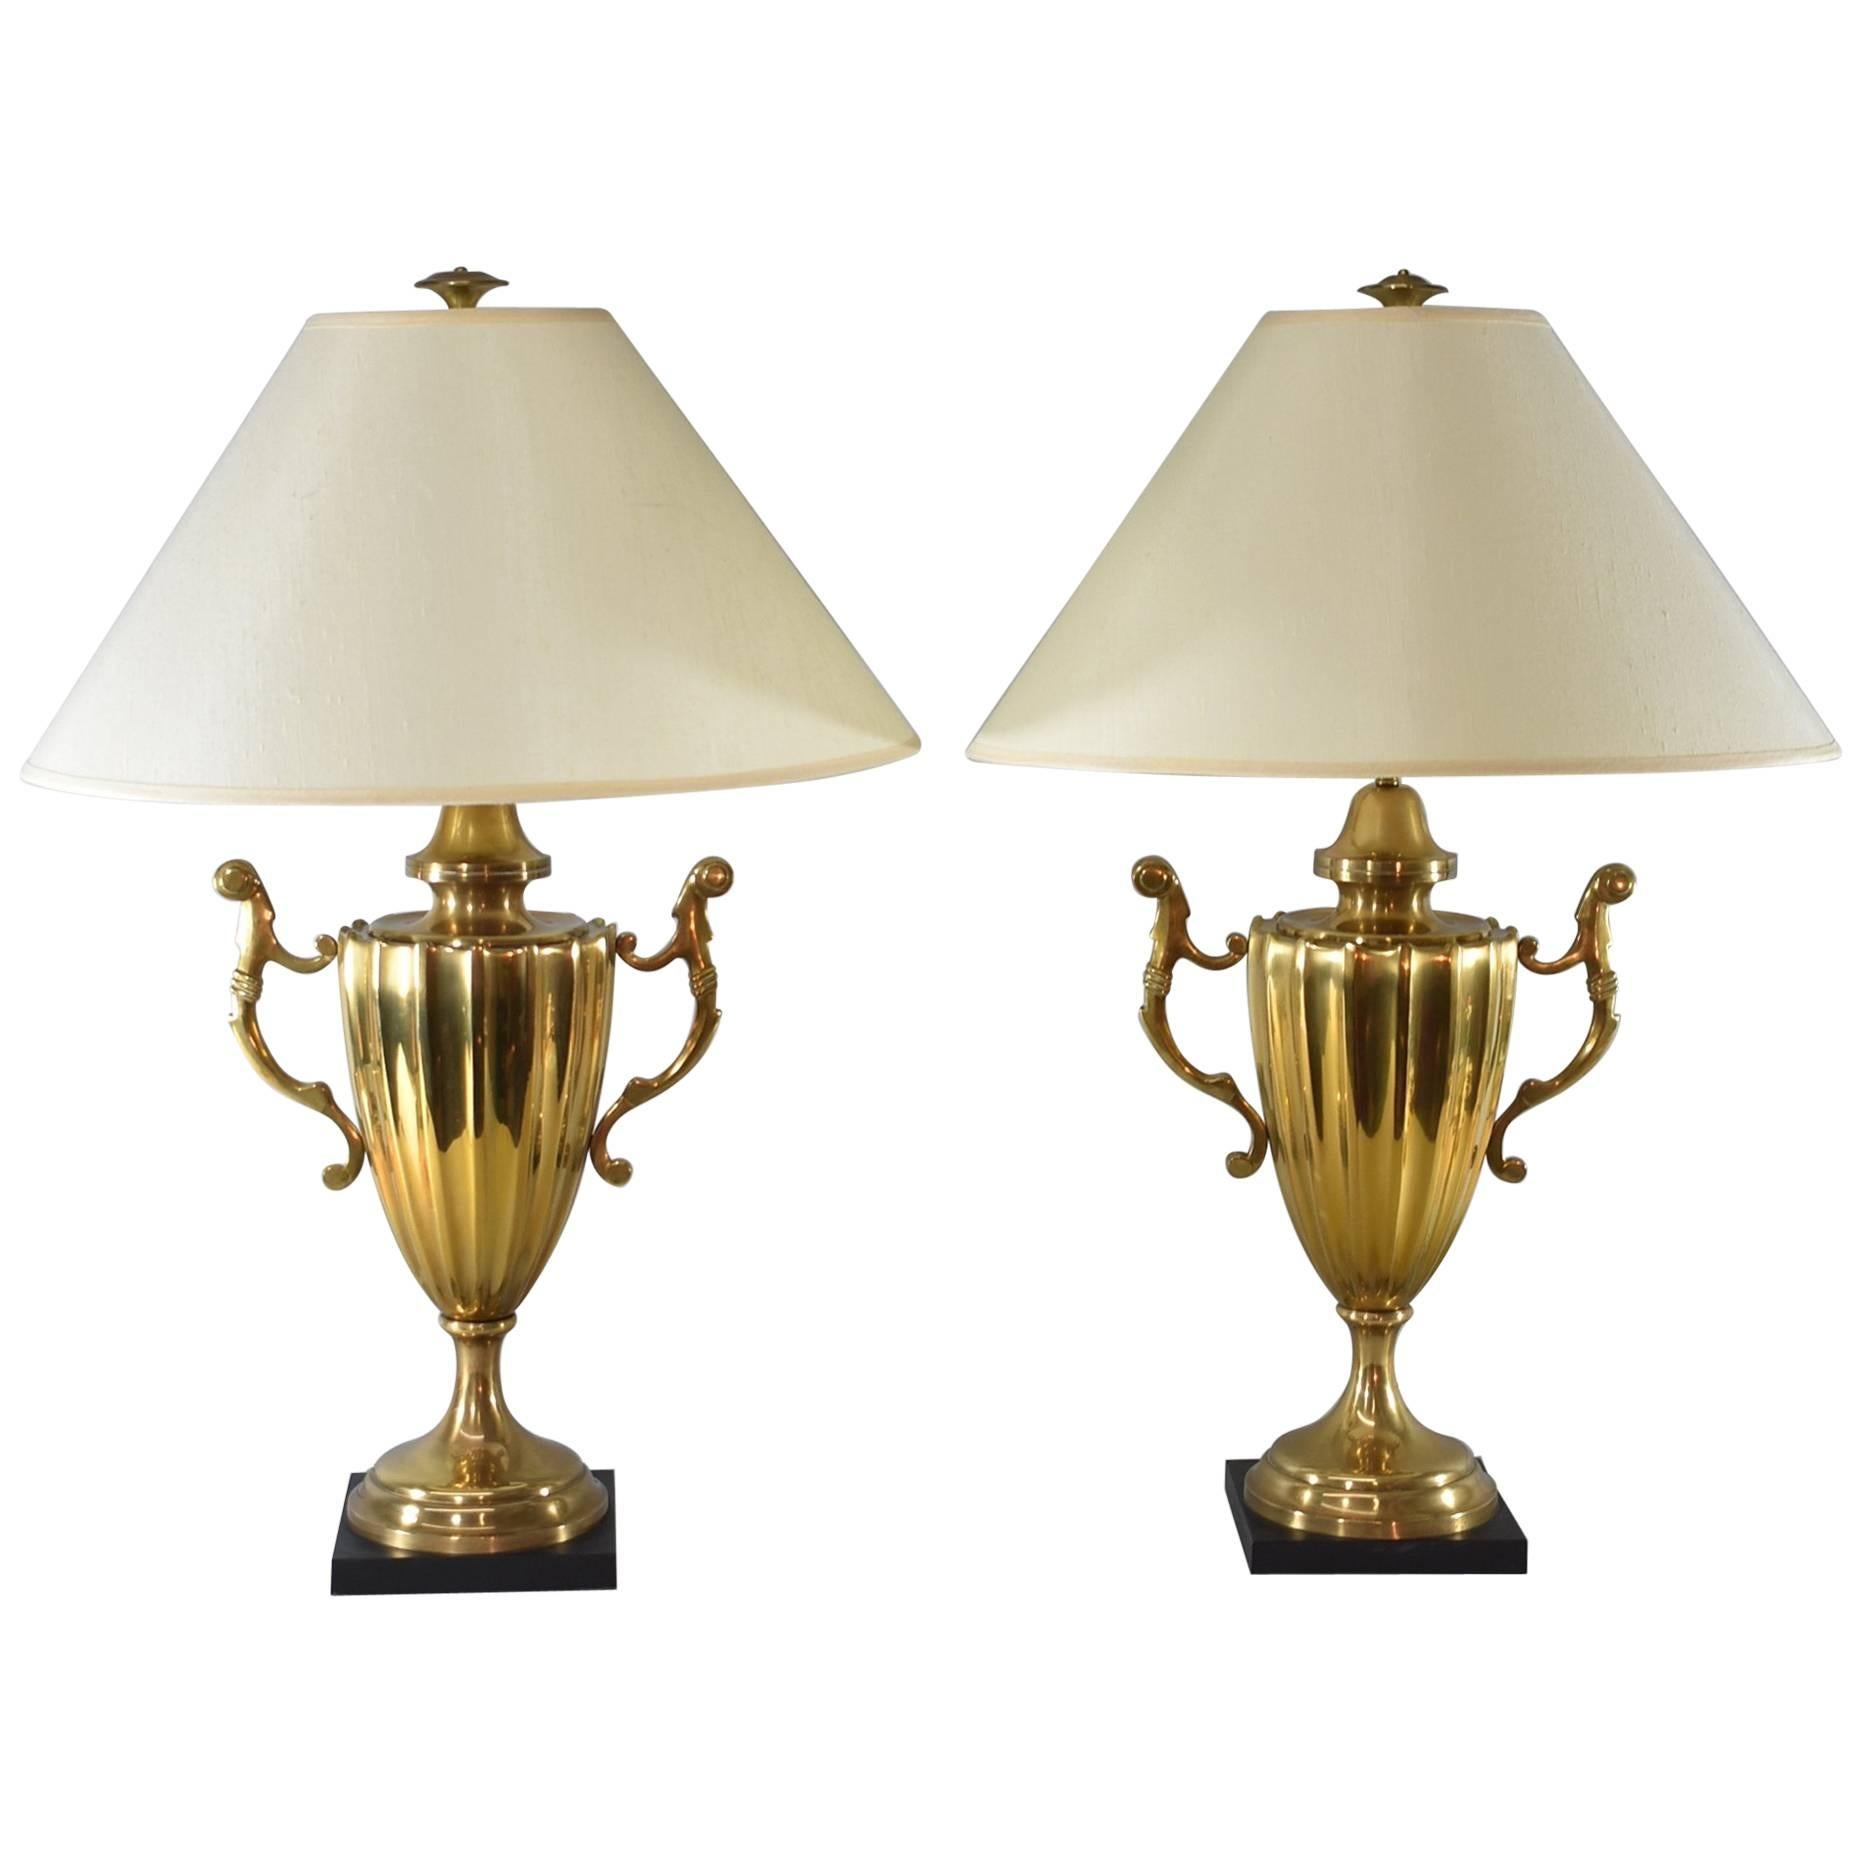 Pair of Large Scale Urn Form Brass Table Lamps by Chapman, 1985